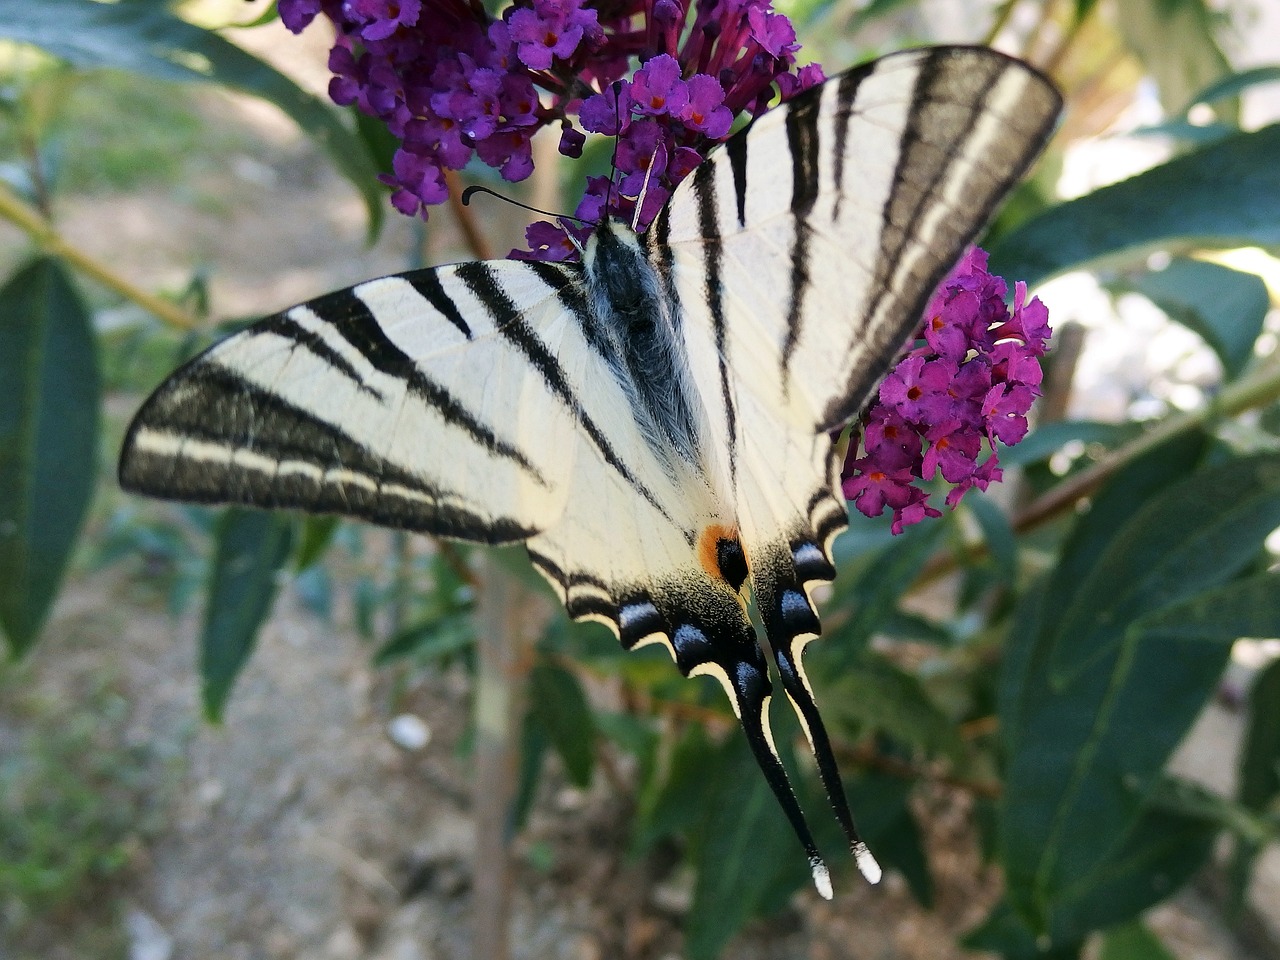 swallowtail fruit butterfly winged insects free photo